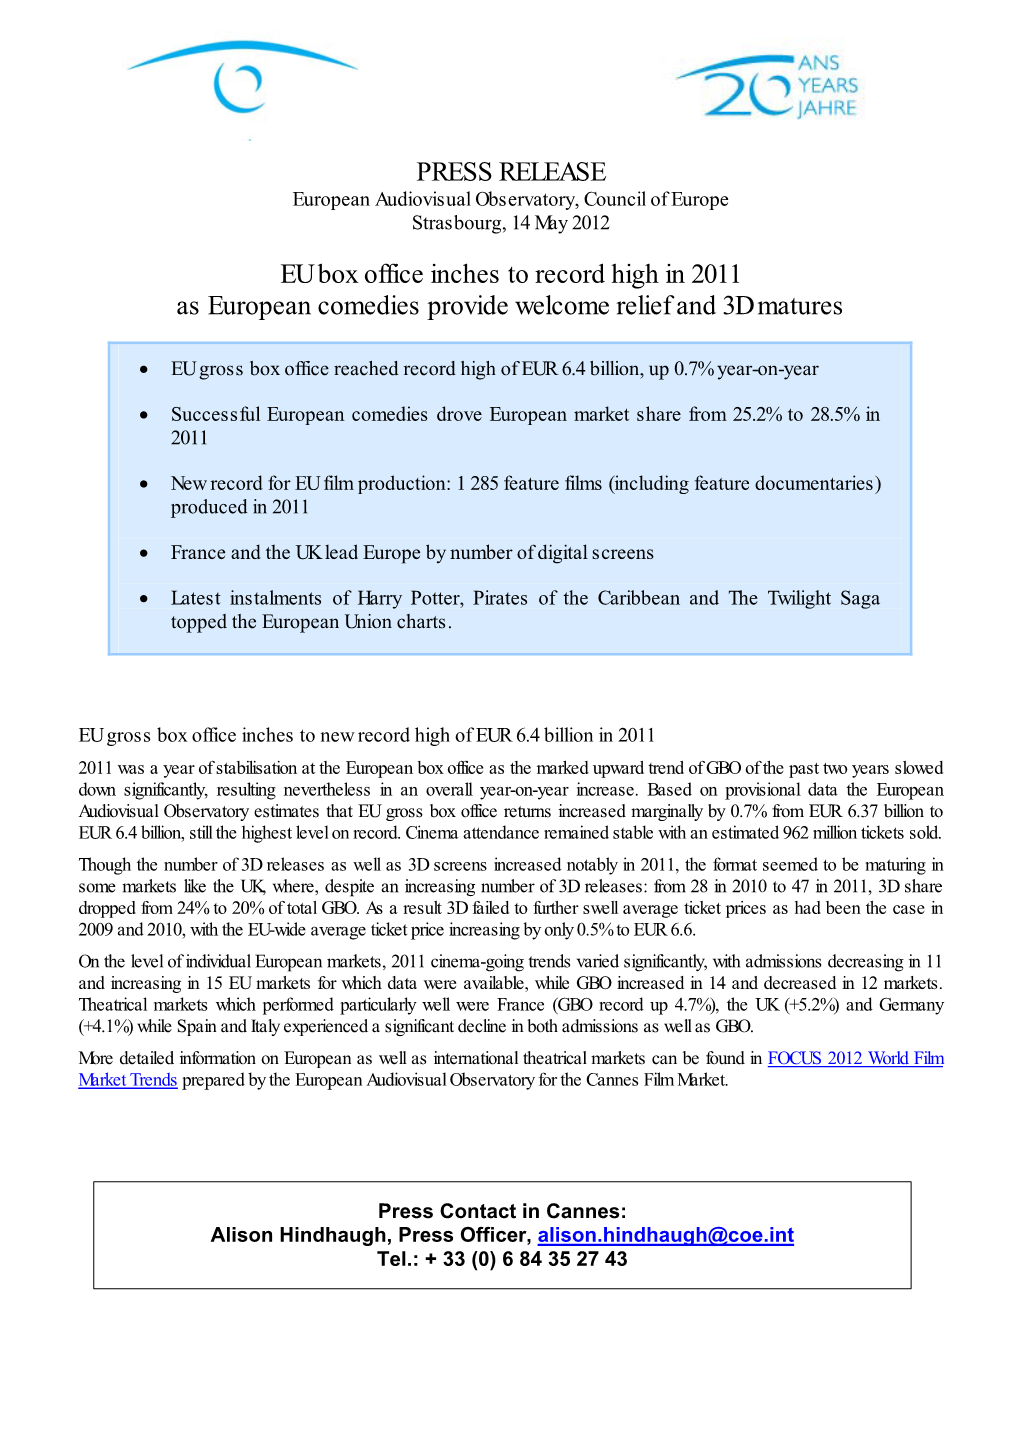 PRESS RELEASE EU Box Office Inches to Record High in 2011 As